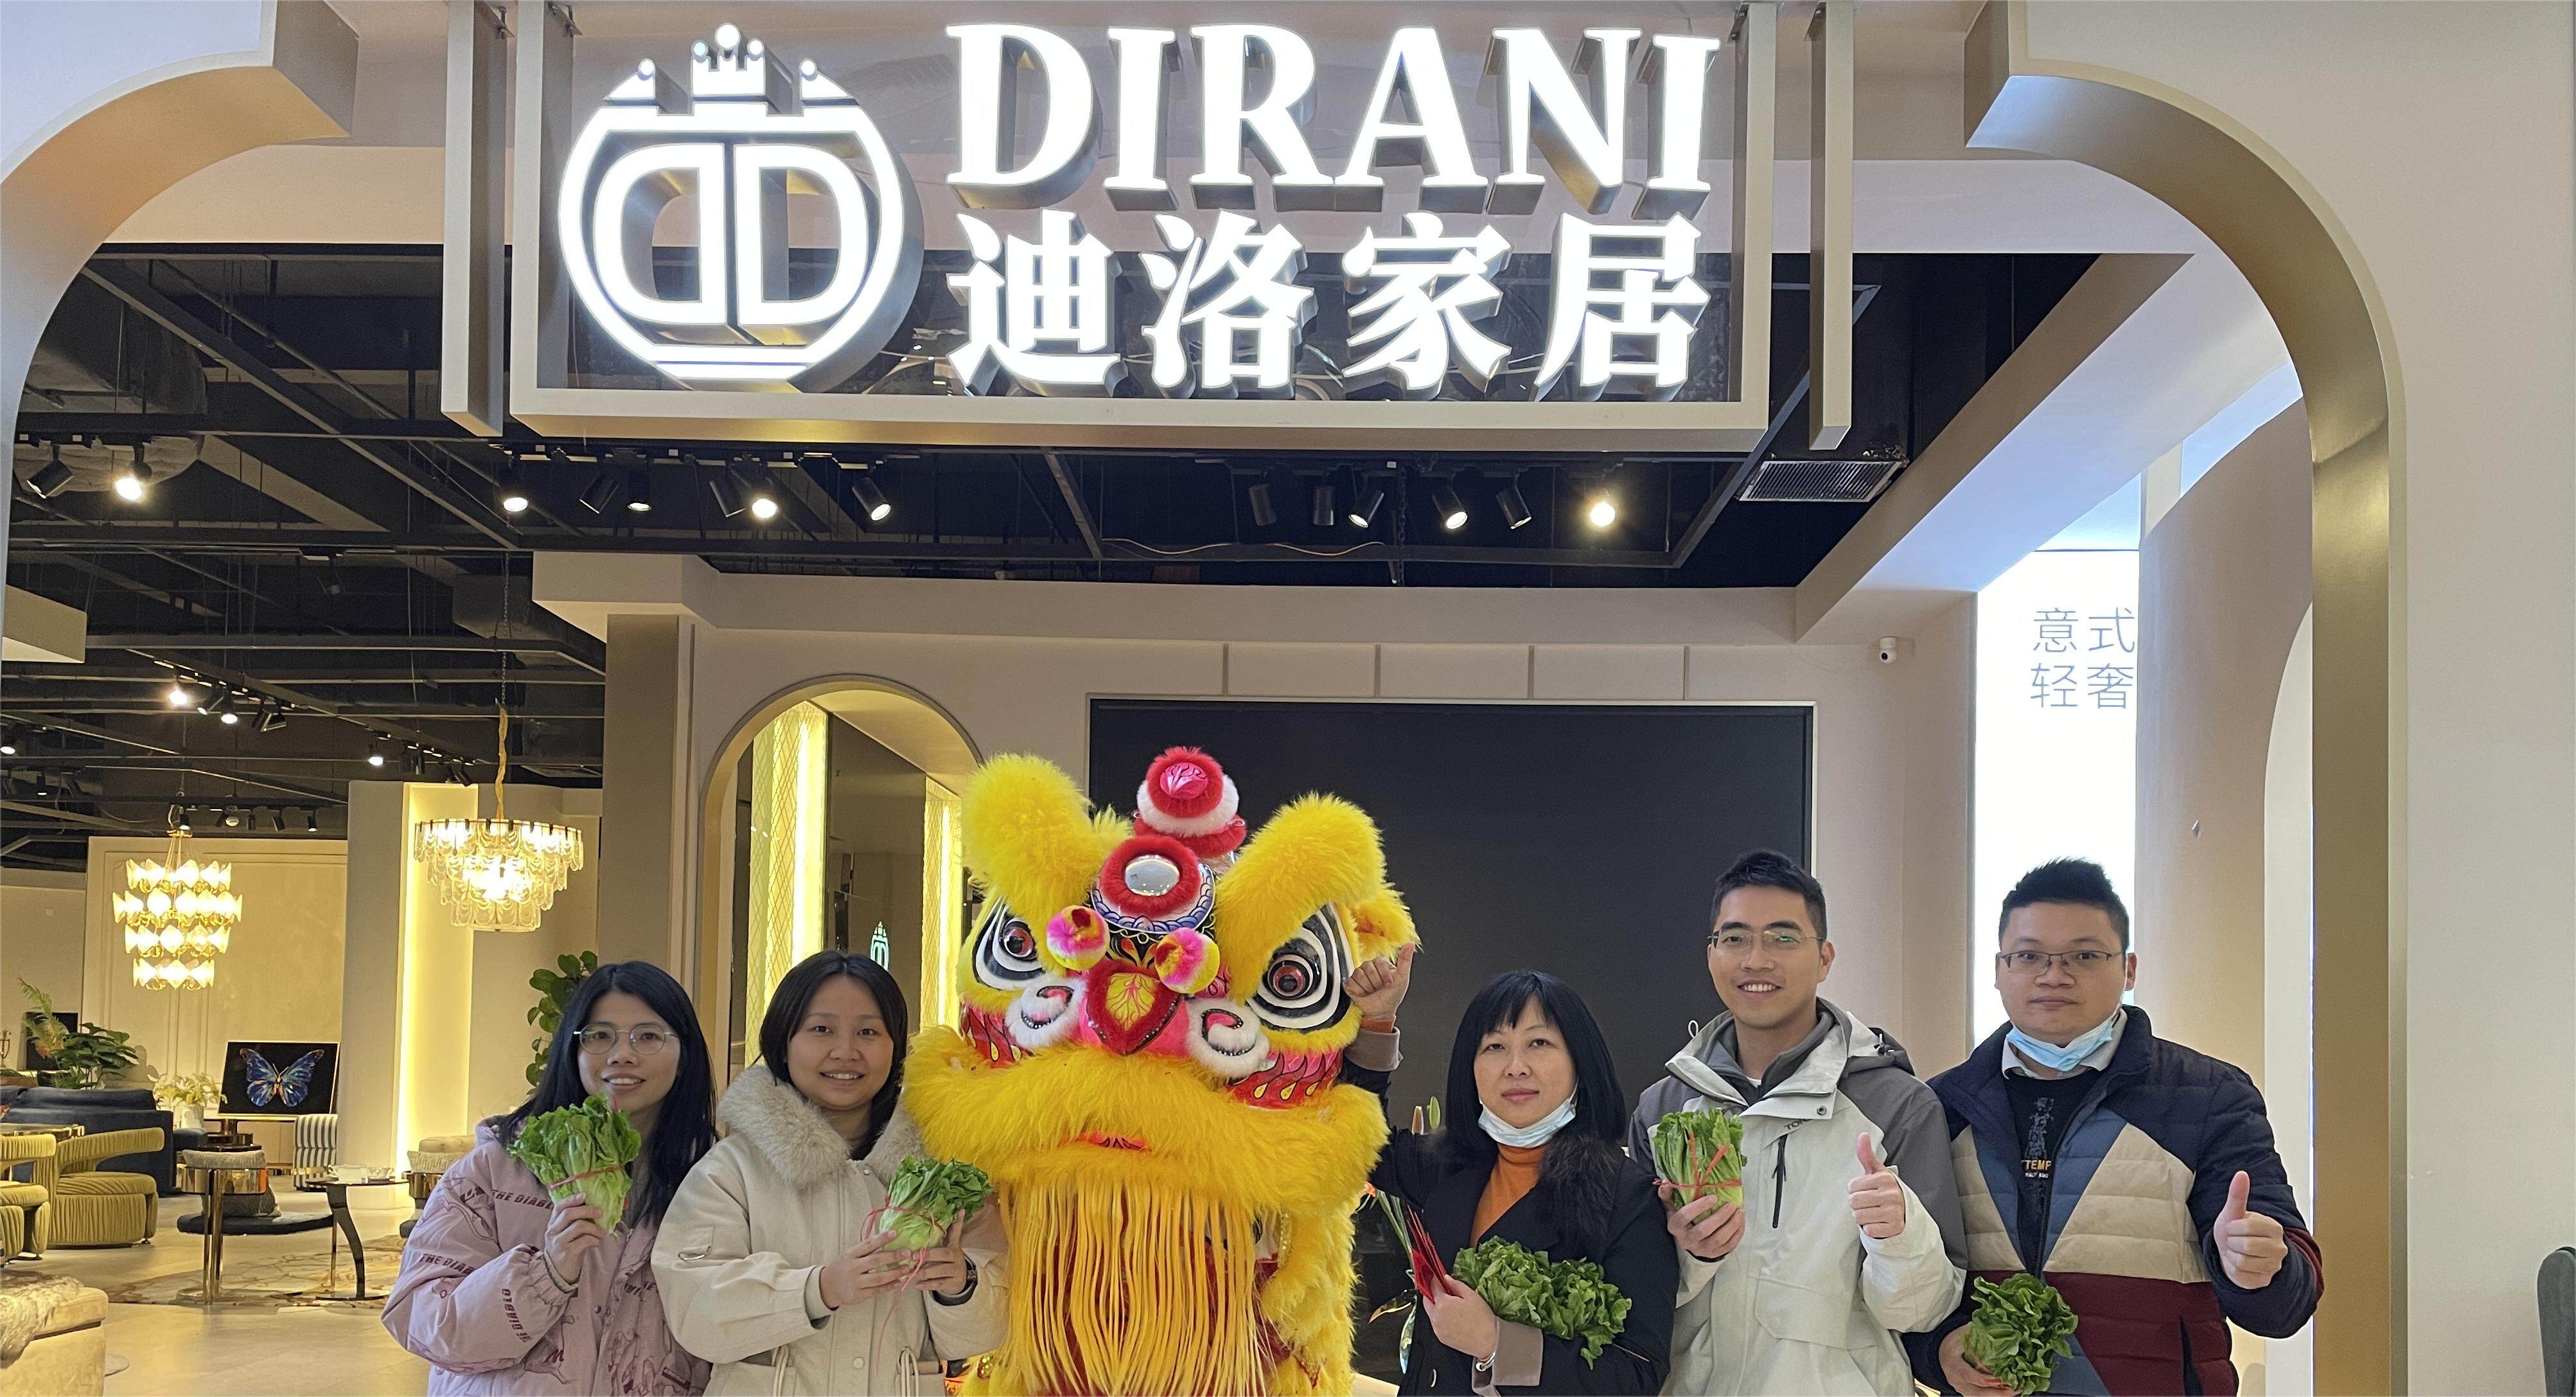 Bringing Good Fortune and Lettuce to Our Showroom: A Lion Dance Celebration